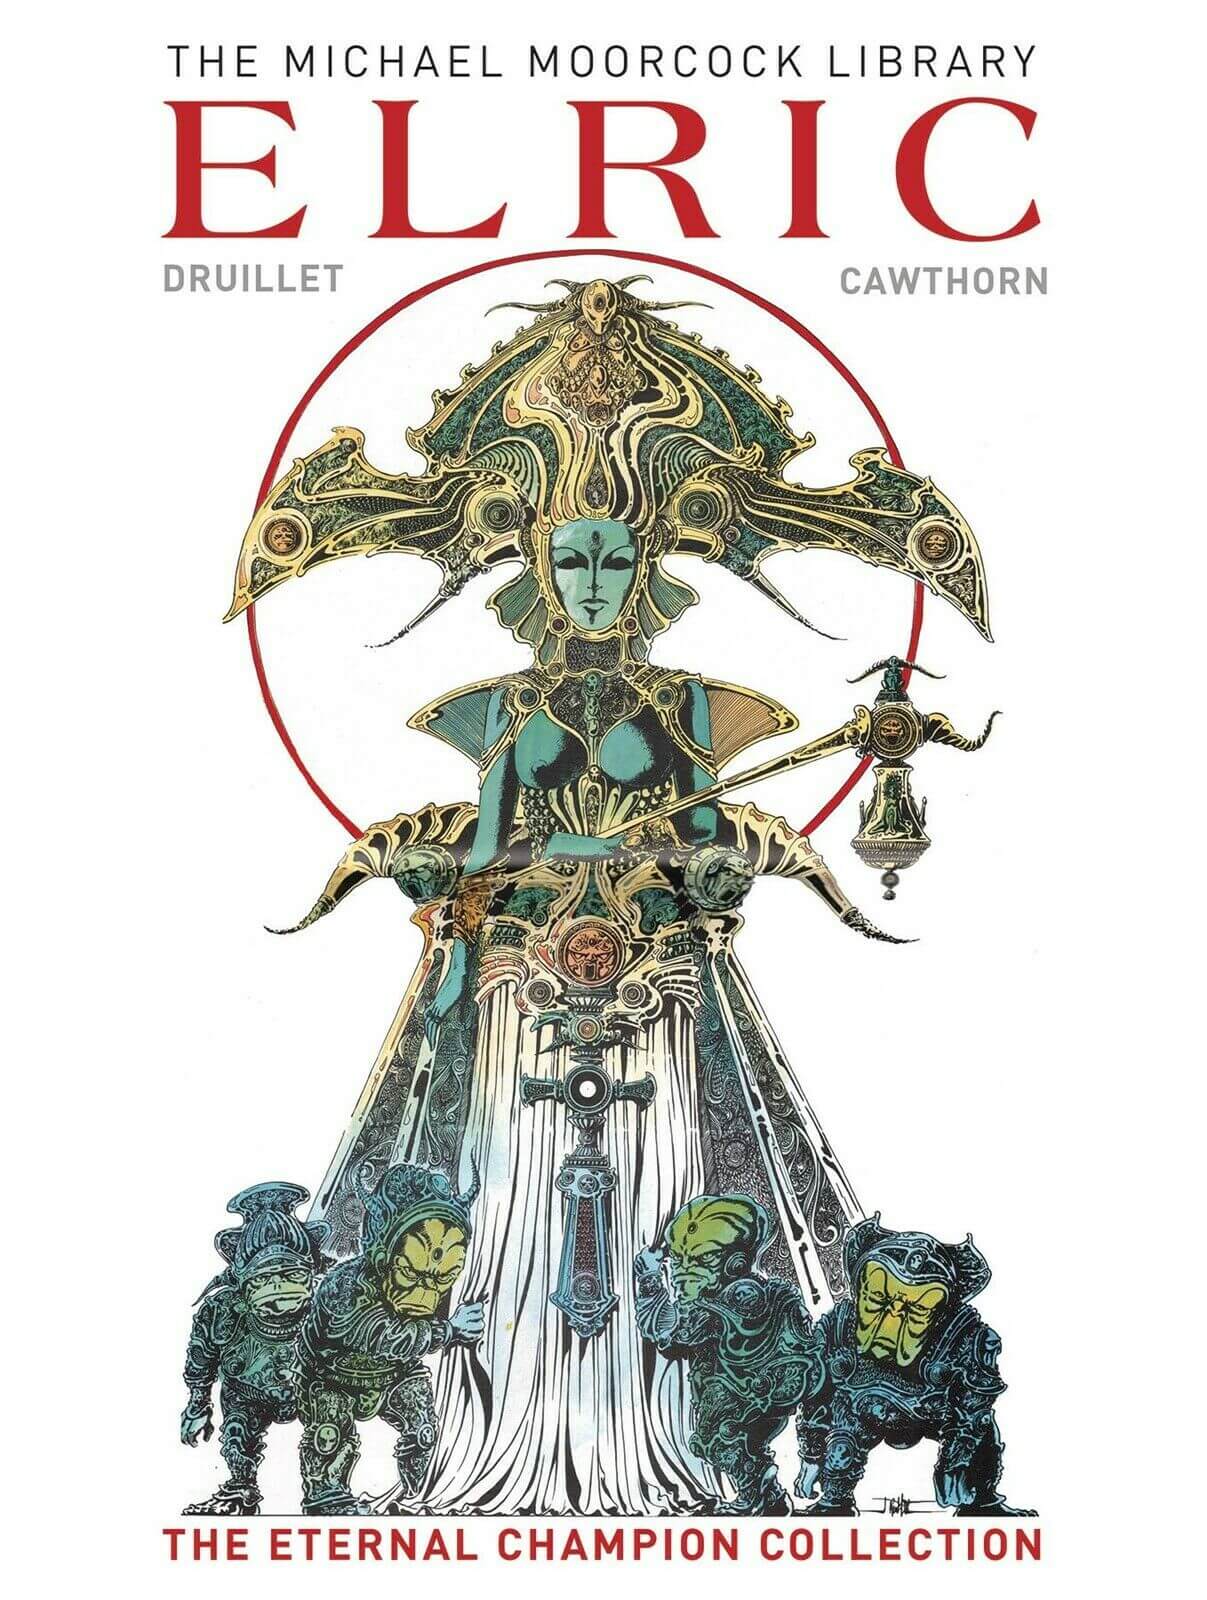 ELRIC